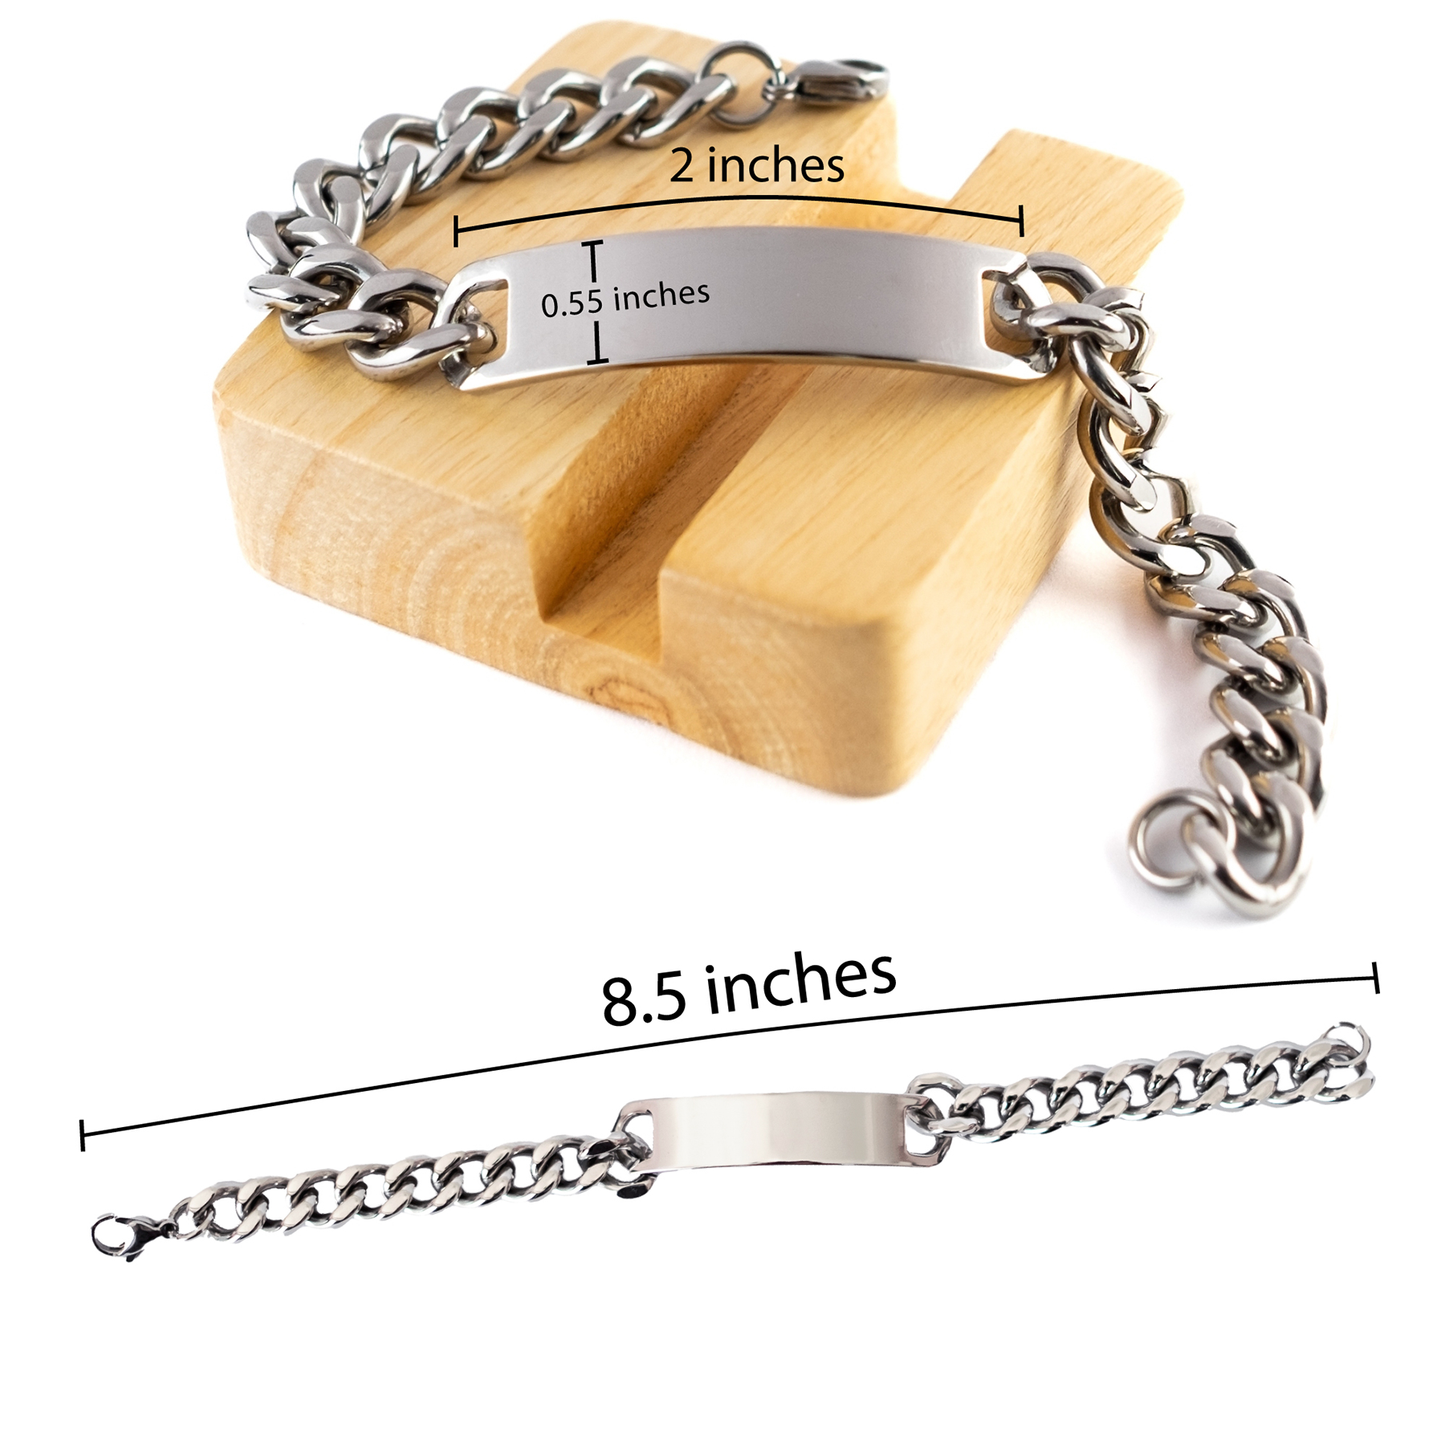 To My Mamma Thank You Gifts, You are appreciated more than you know, Appreciation Cuban Chain Stainless Steel Bracelet for Mamma, Birthday Unique Gifts for Mamma